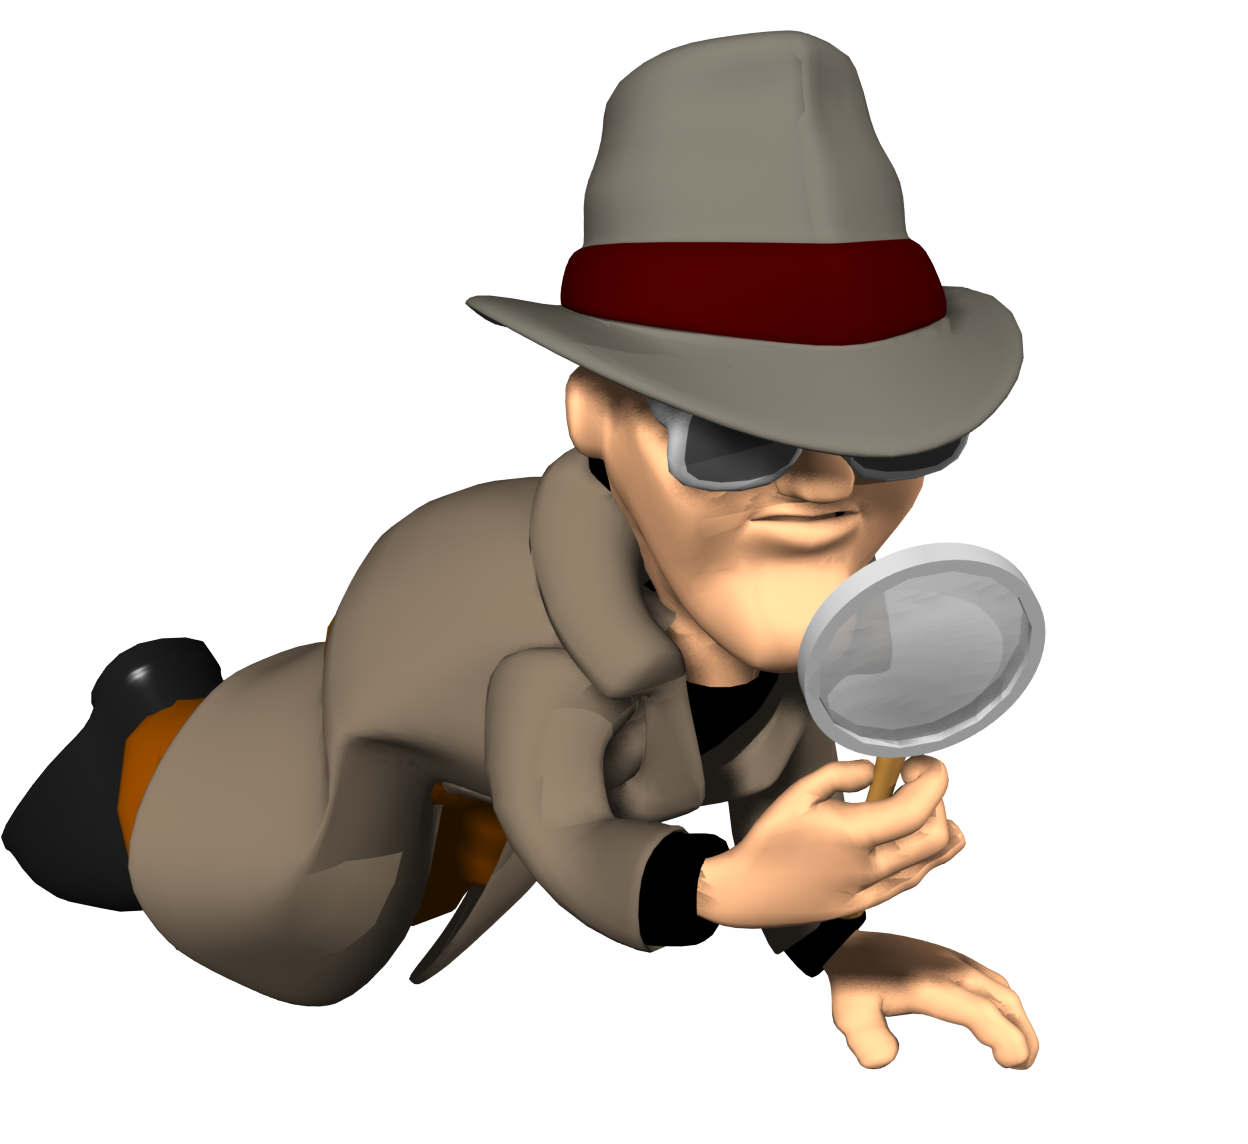 Get Matrimonial Investigations Done From Best Private Investigator - Investigator, Transparent background PNG HD thumbnail